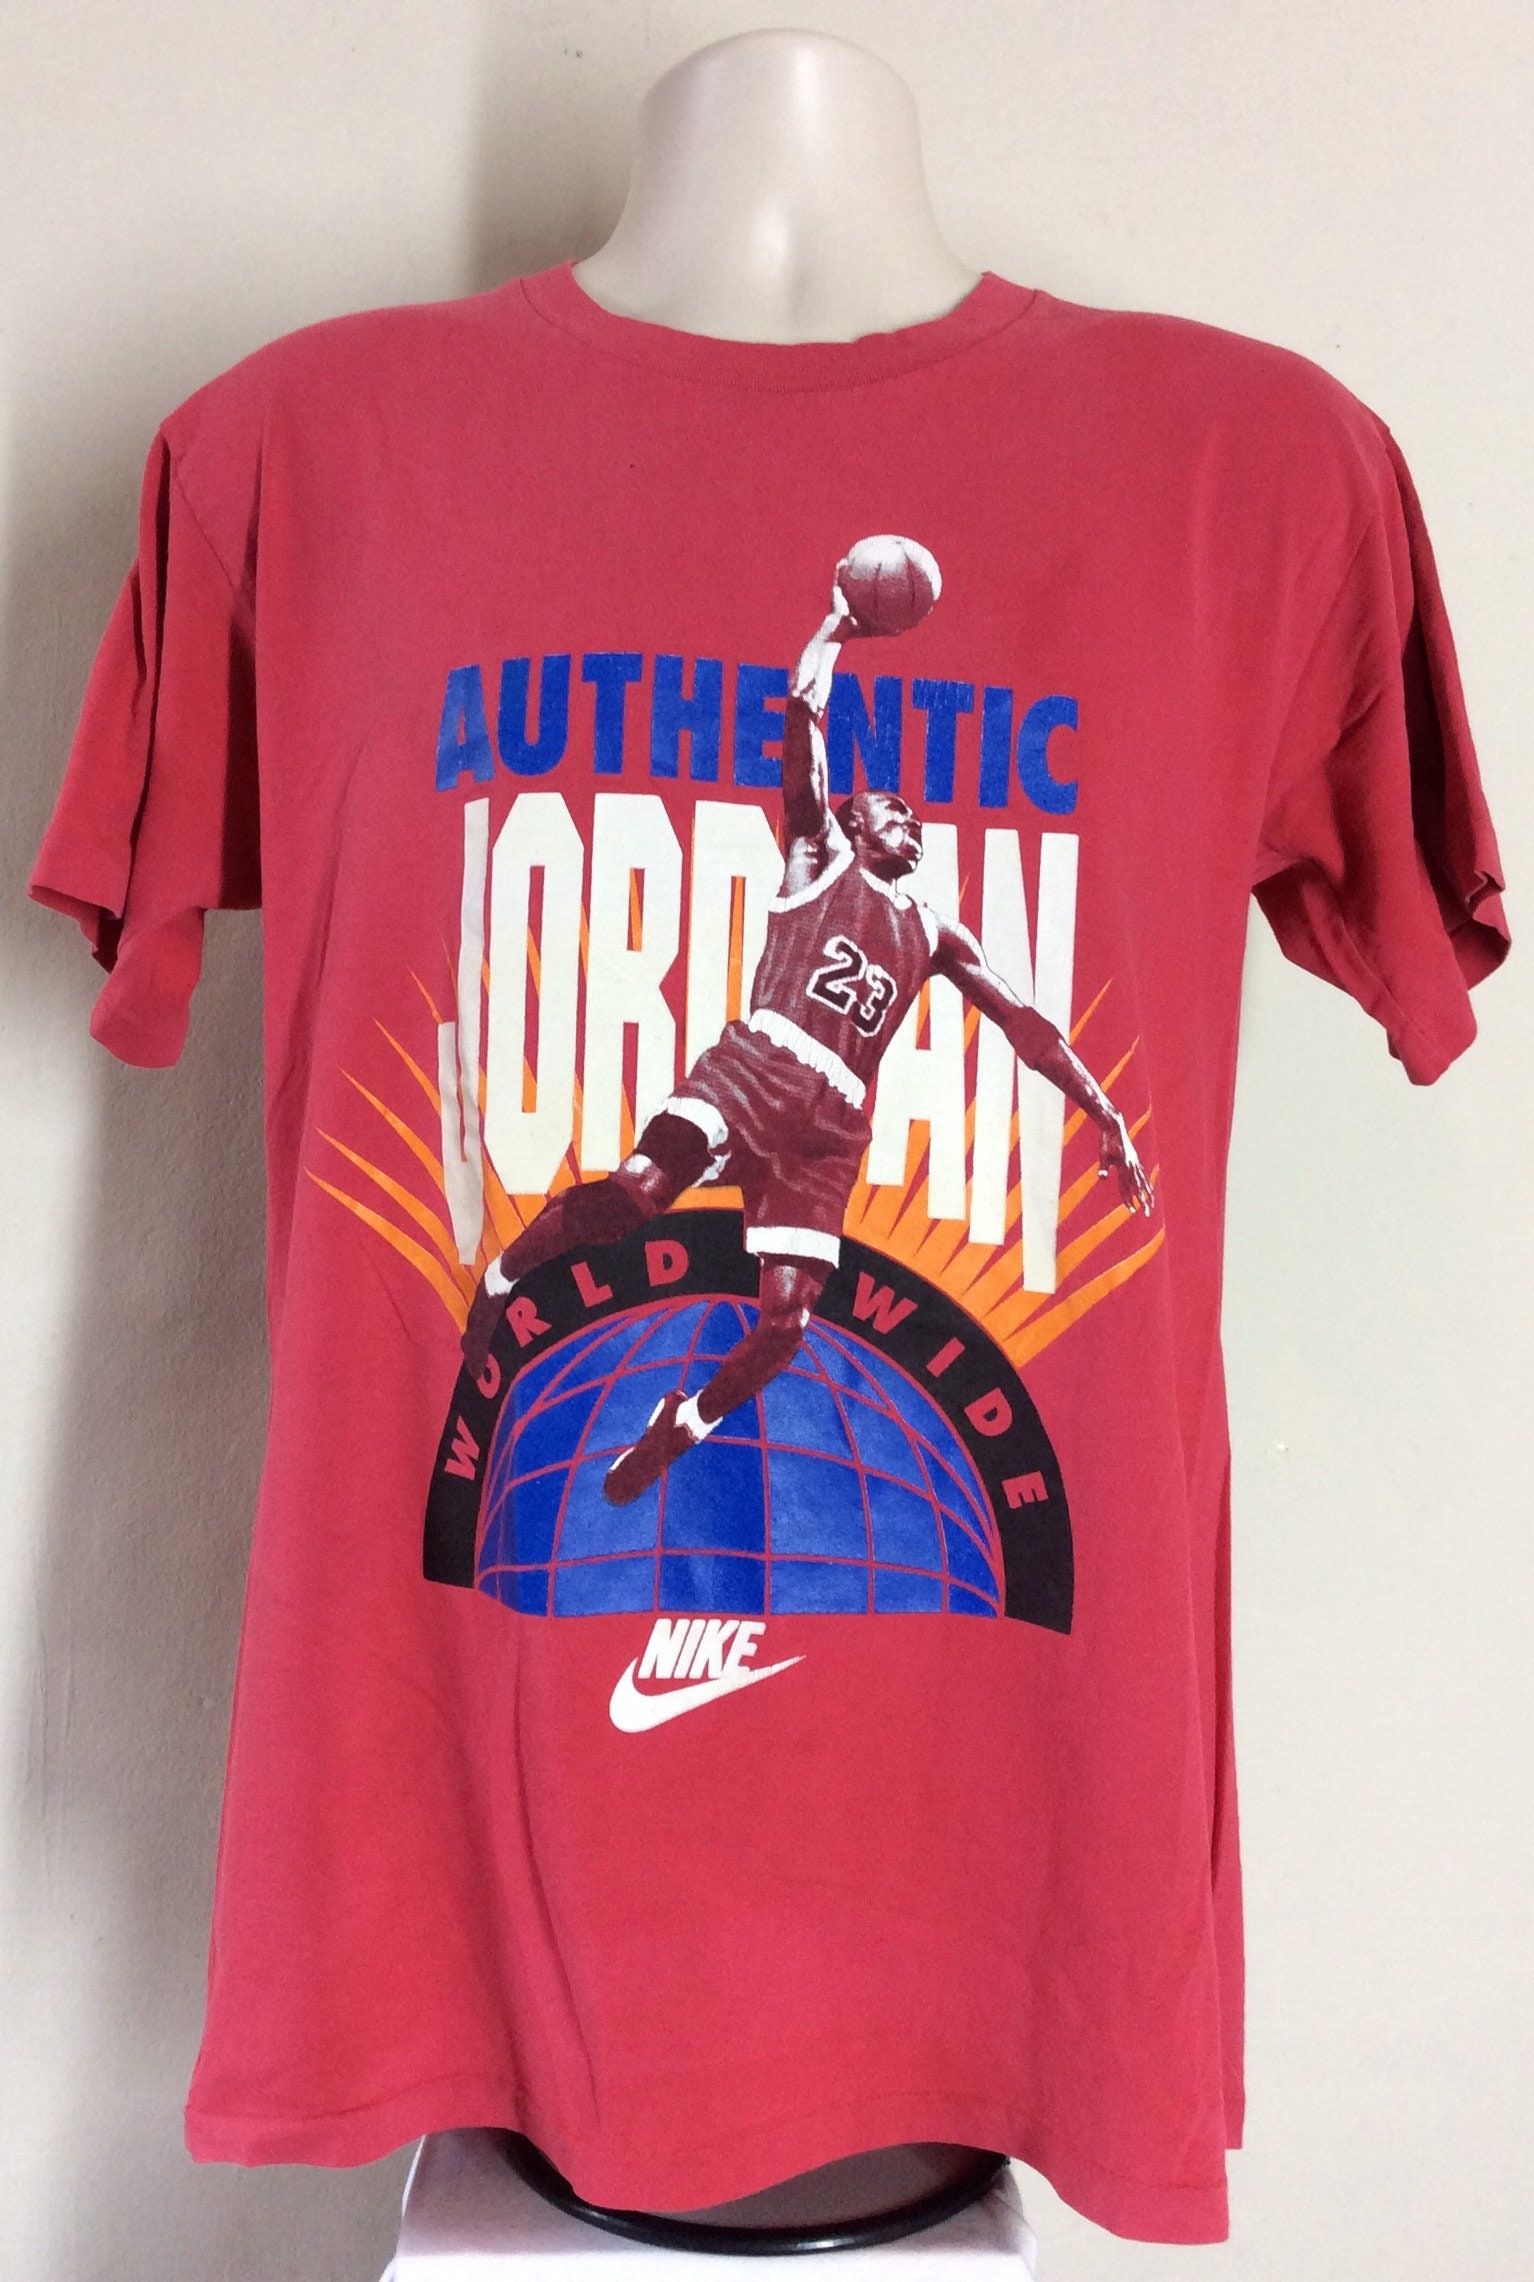 Vtg Early 90s Authentic Jordan Worldwide T-Shirt Red Pink M/L | Etsy